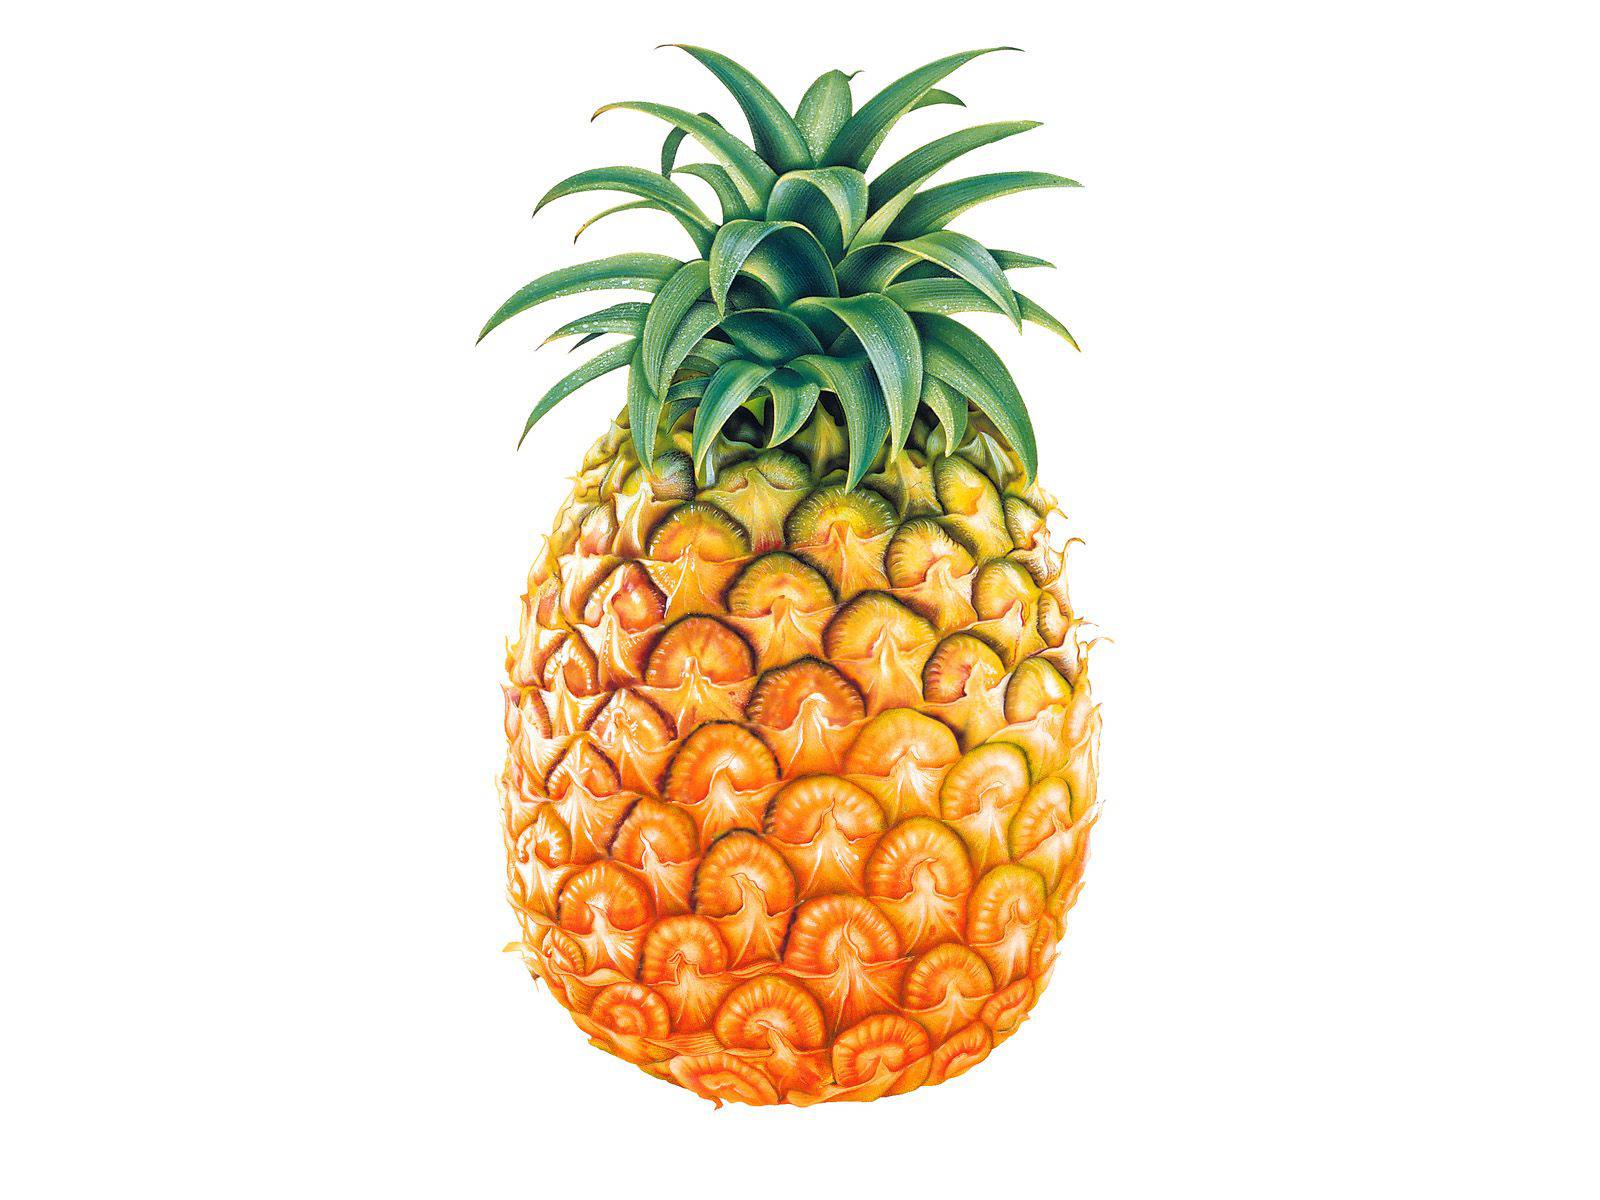 clipart images pineapples - photo #23